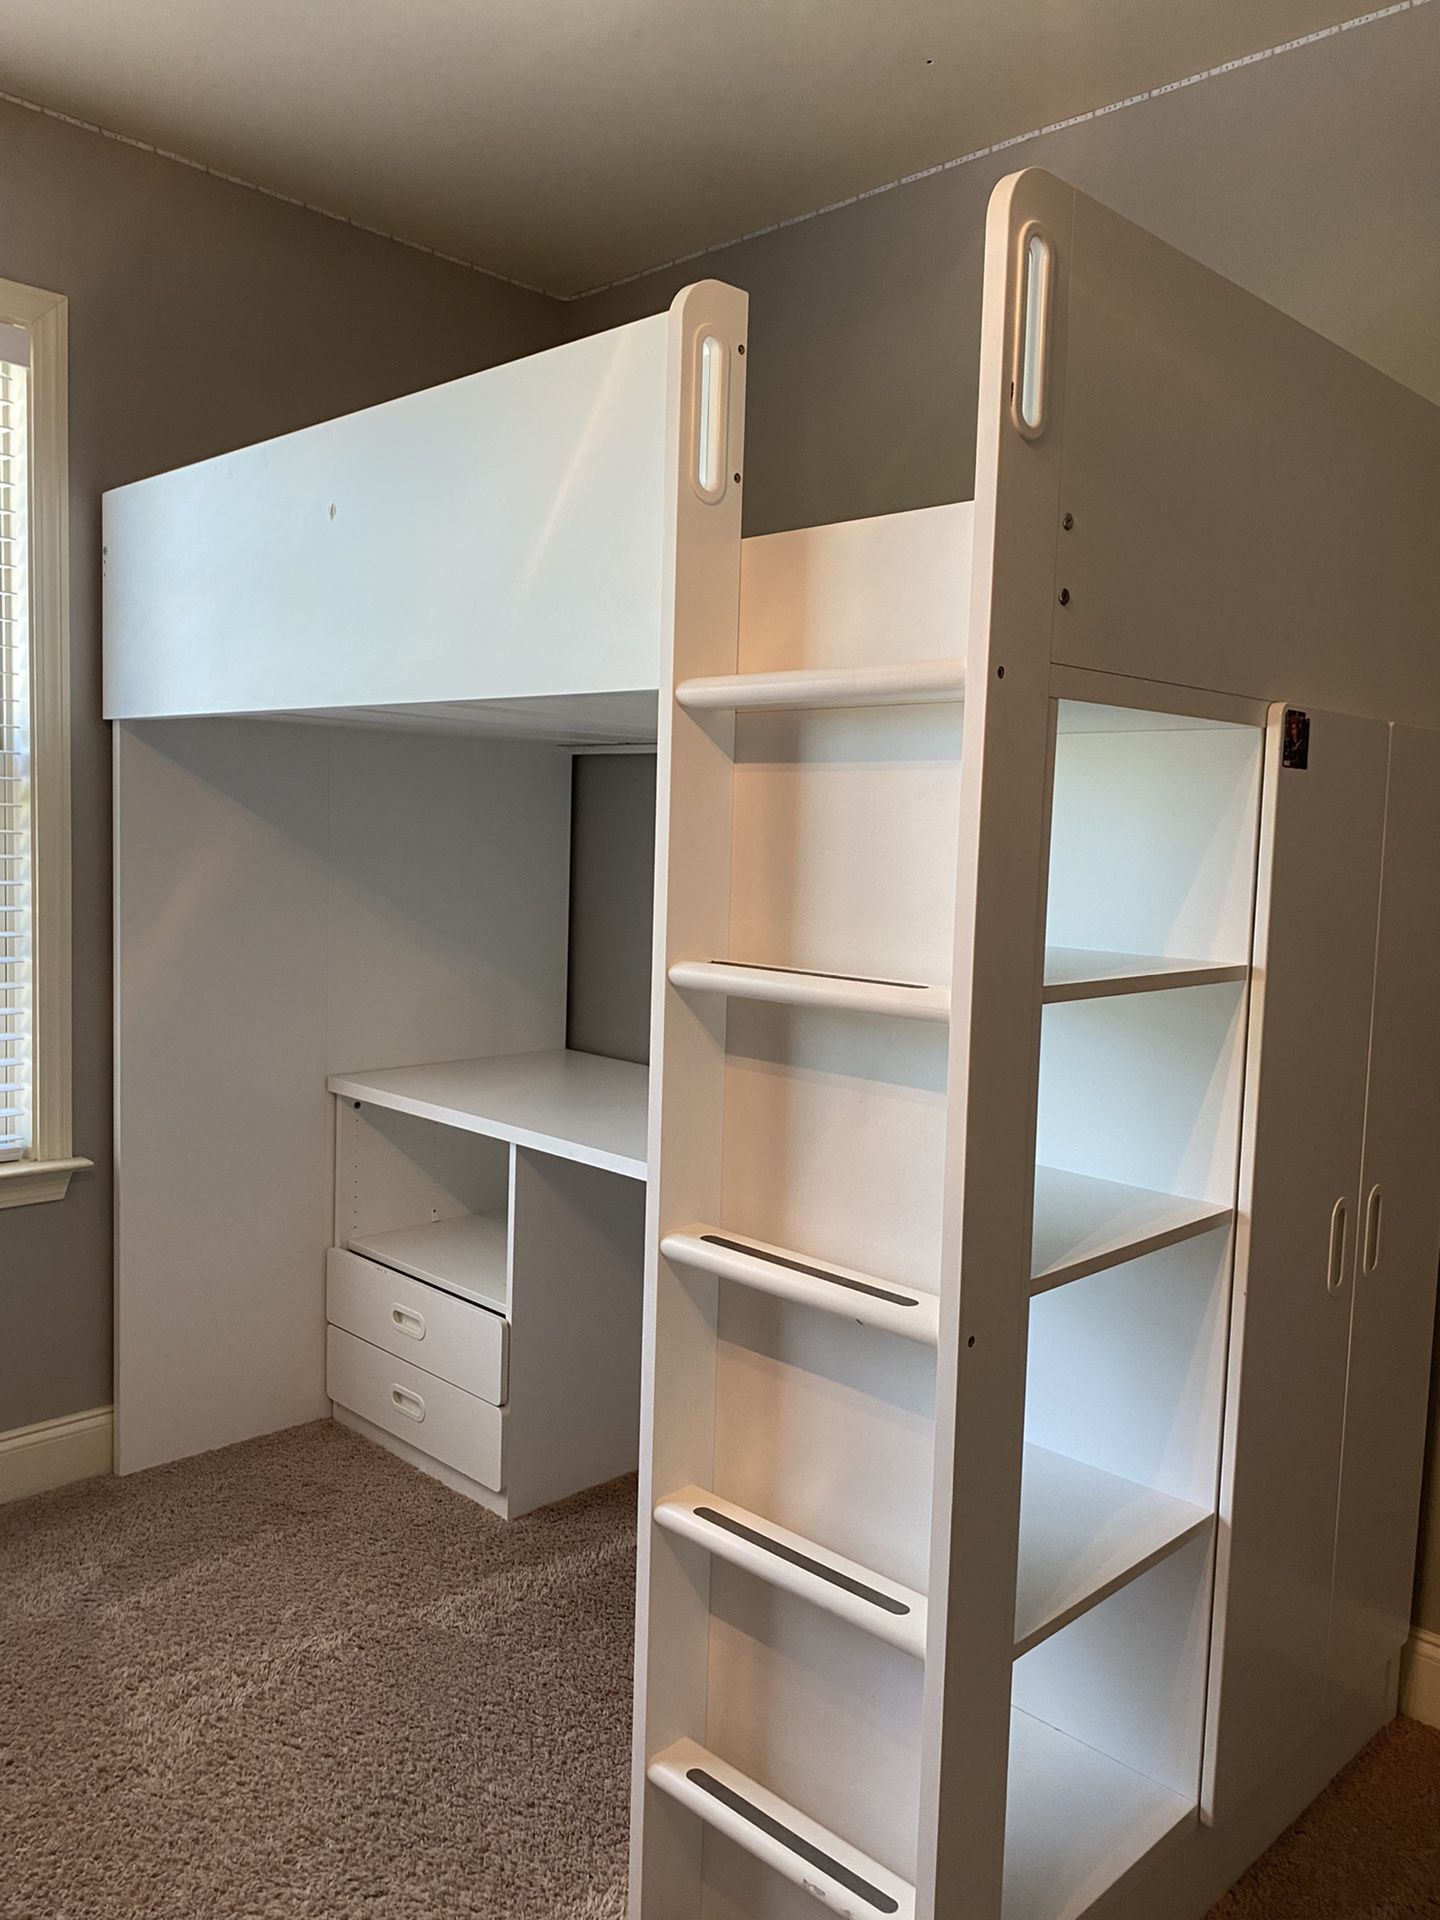 Two Ikea Loft beds W/ Desk, Closet And Drawers.